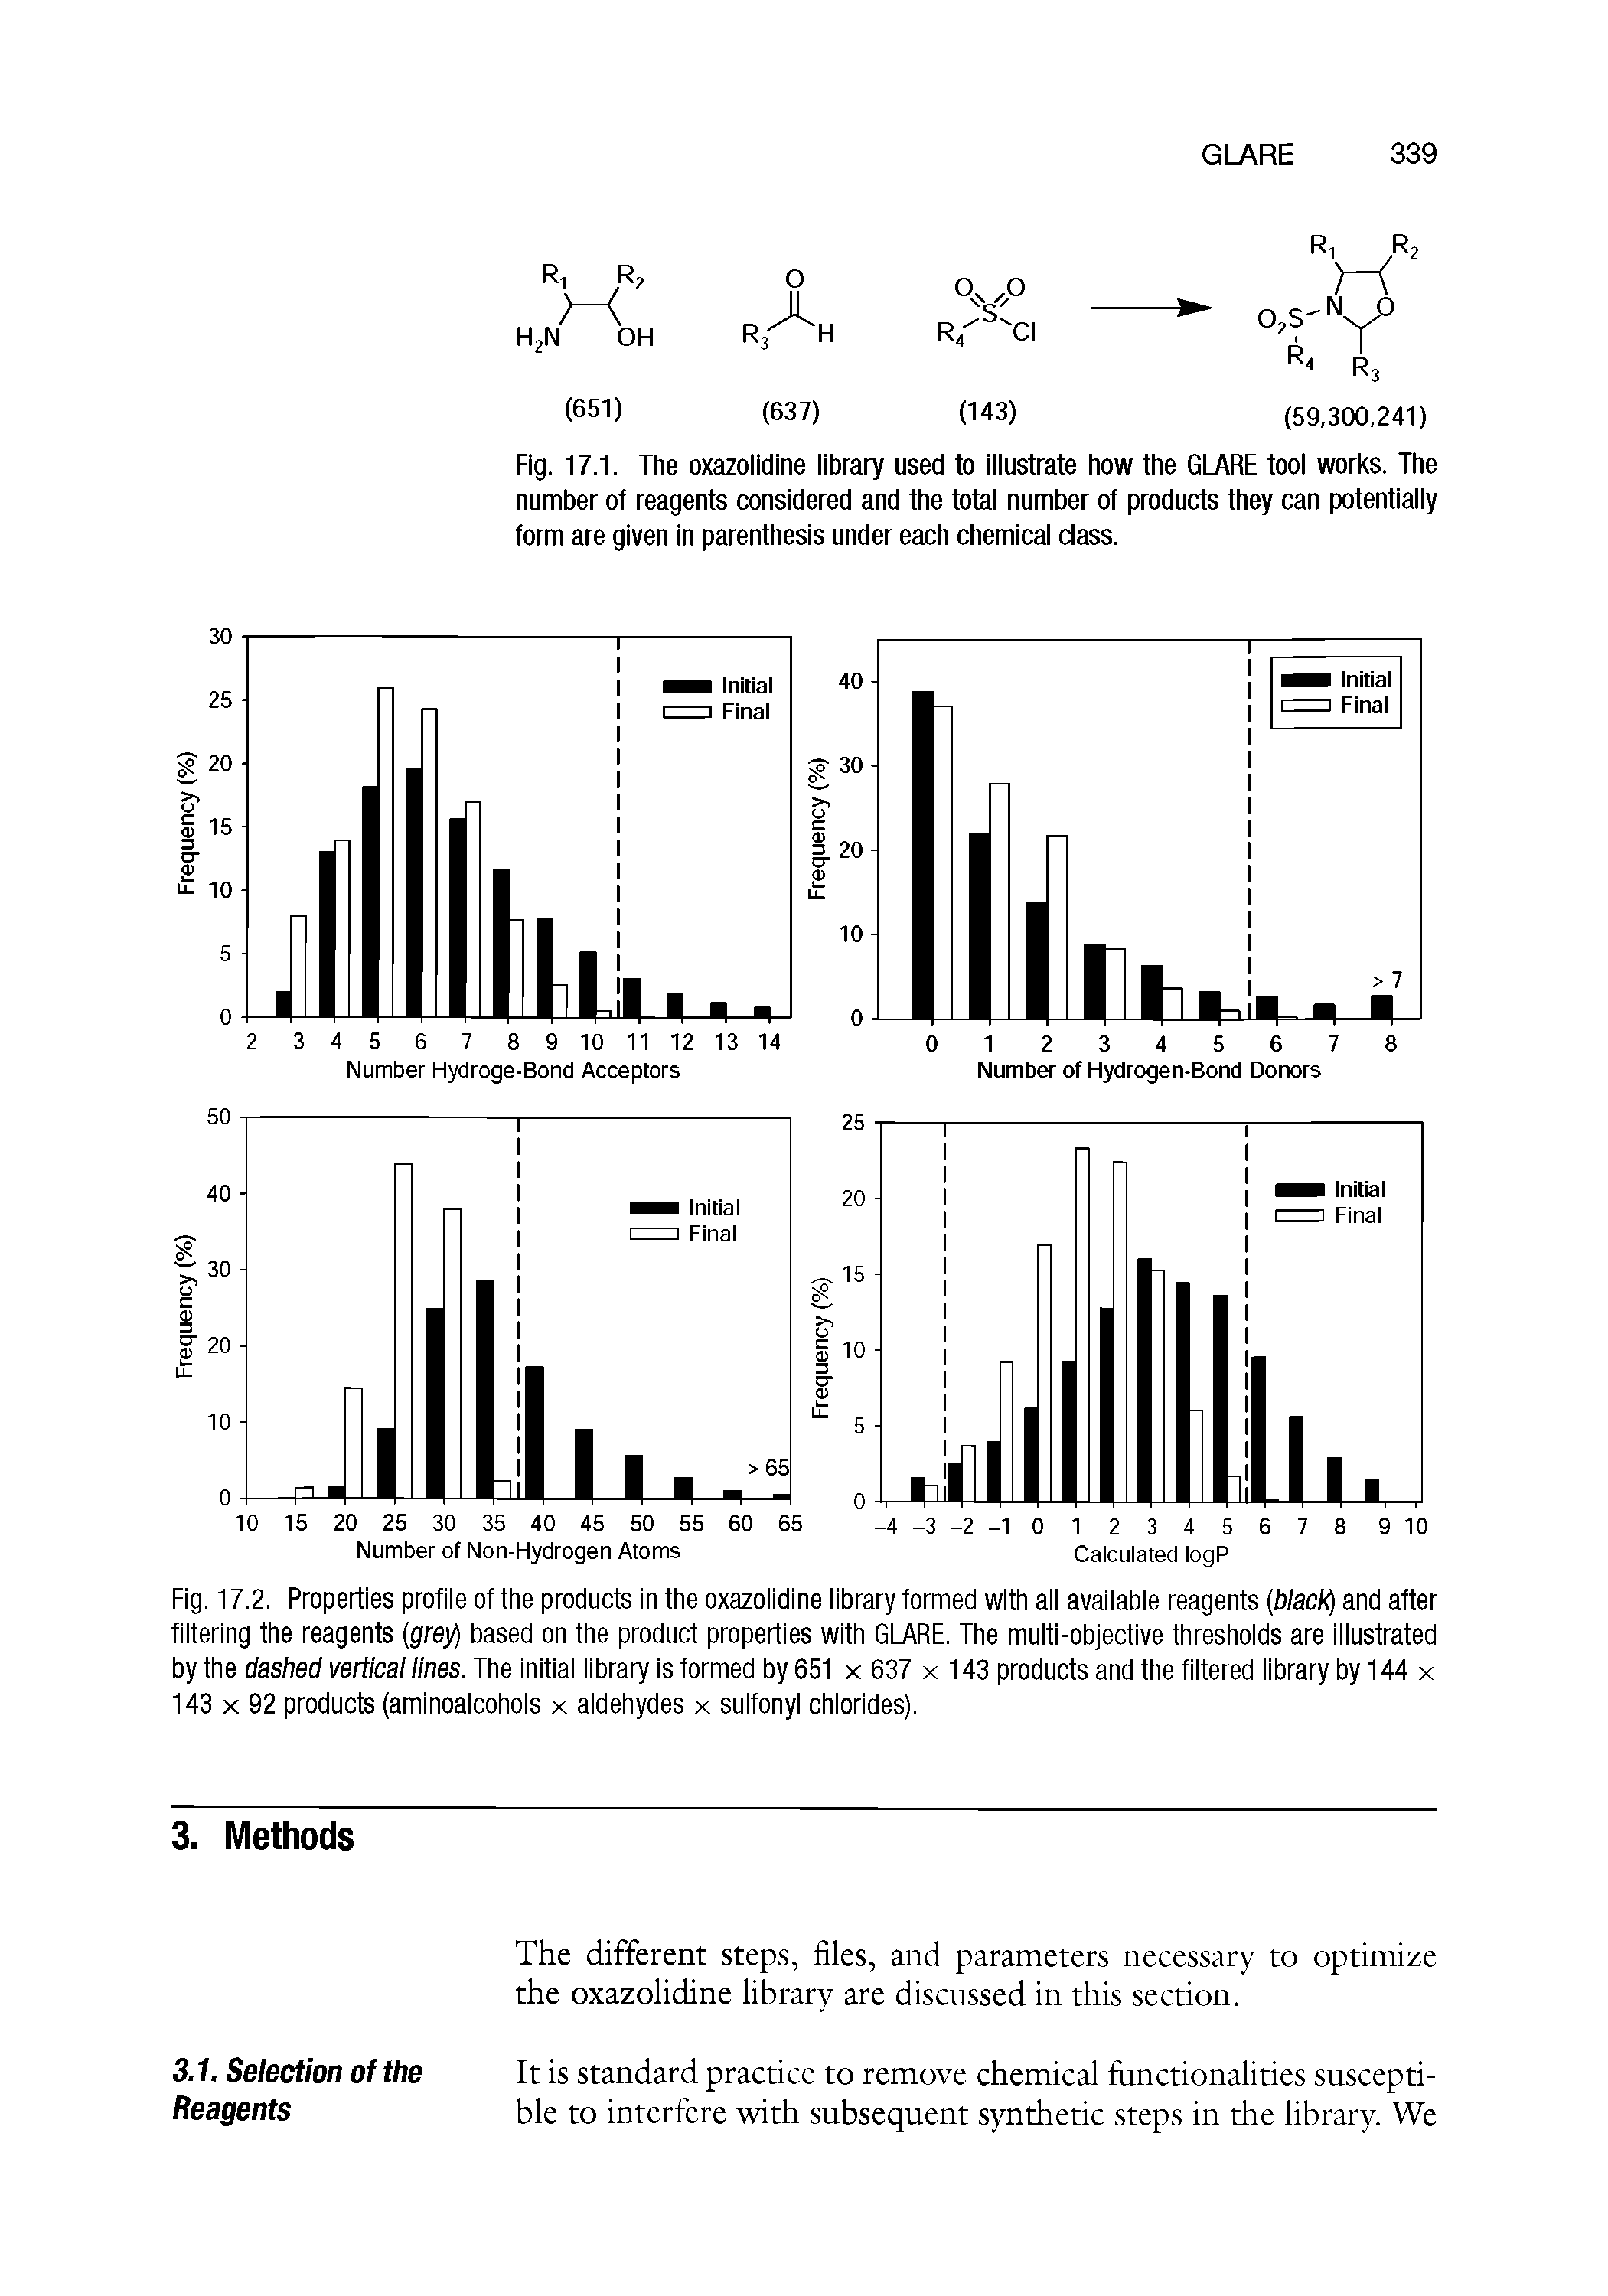 Fig. 17.2. Properties profile of the products in the oxazolidine library formed with all available reagents (blacKj and after filtering the reagents (grefl based on the product properties with GLARE. The multi-objective thresholds are illustrated by the dashed vertical lines. The initial library is formed by 651 x 637 x 143 products and the filtered library by 144 x 143 x 92 products (aminoalcohols x aldehydes x sulfonyl chlorides).